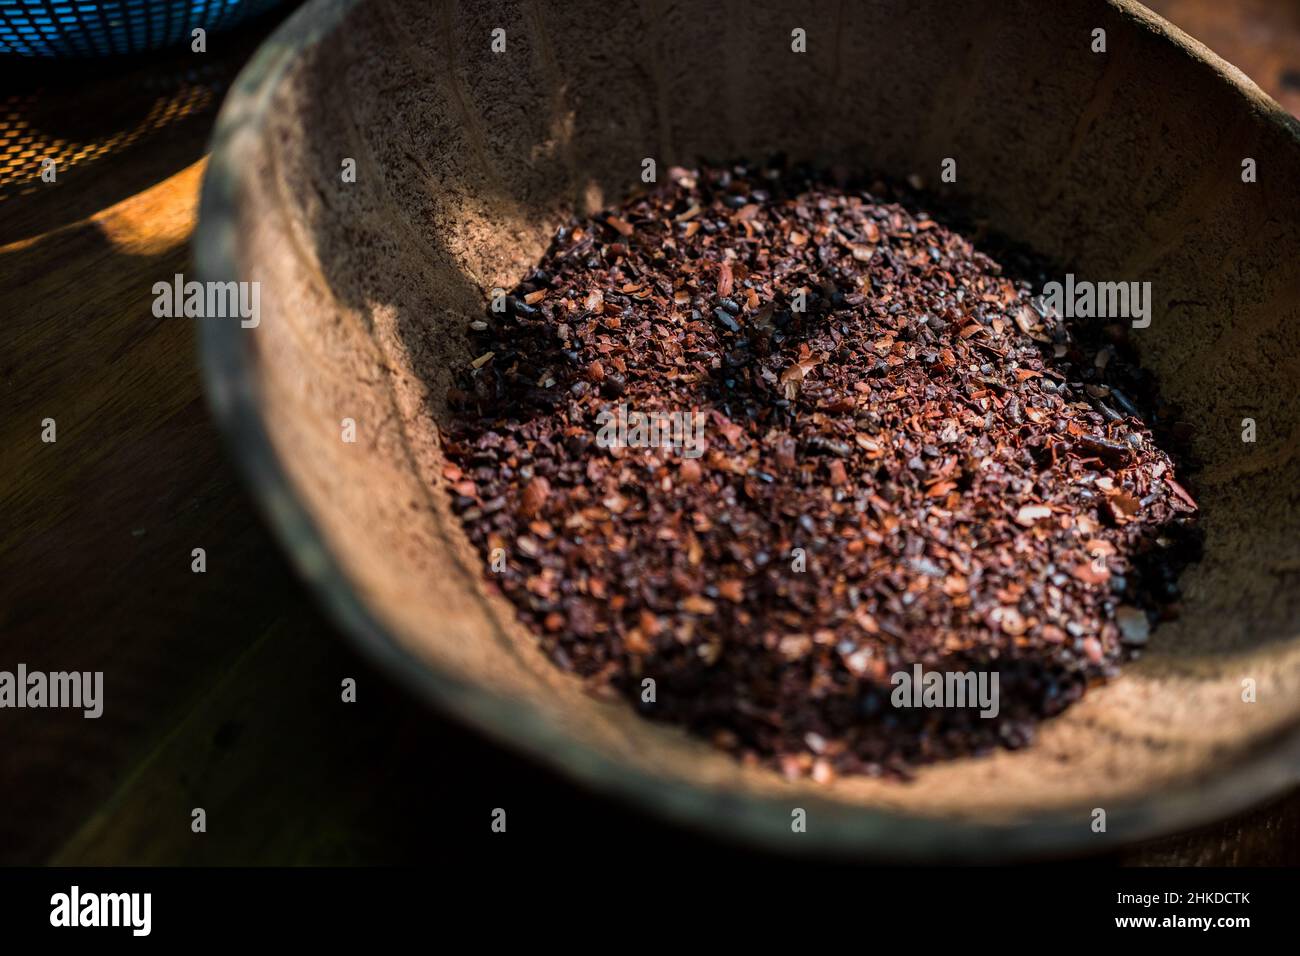 Coarsely crushed cacao beans are seen deposited in a bowl in artisanal chocolate manufacture in Xochistlahuaca, Guerrero, Mexico. Stock Photo